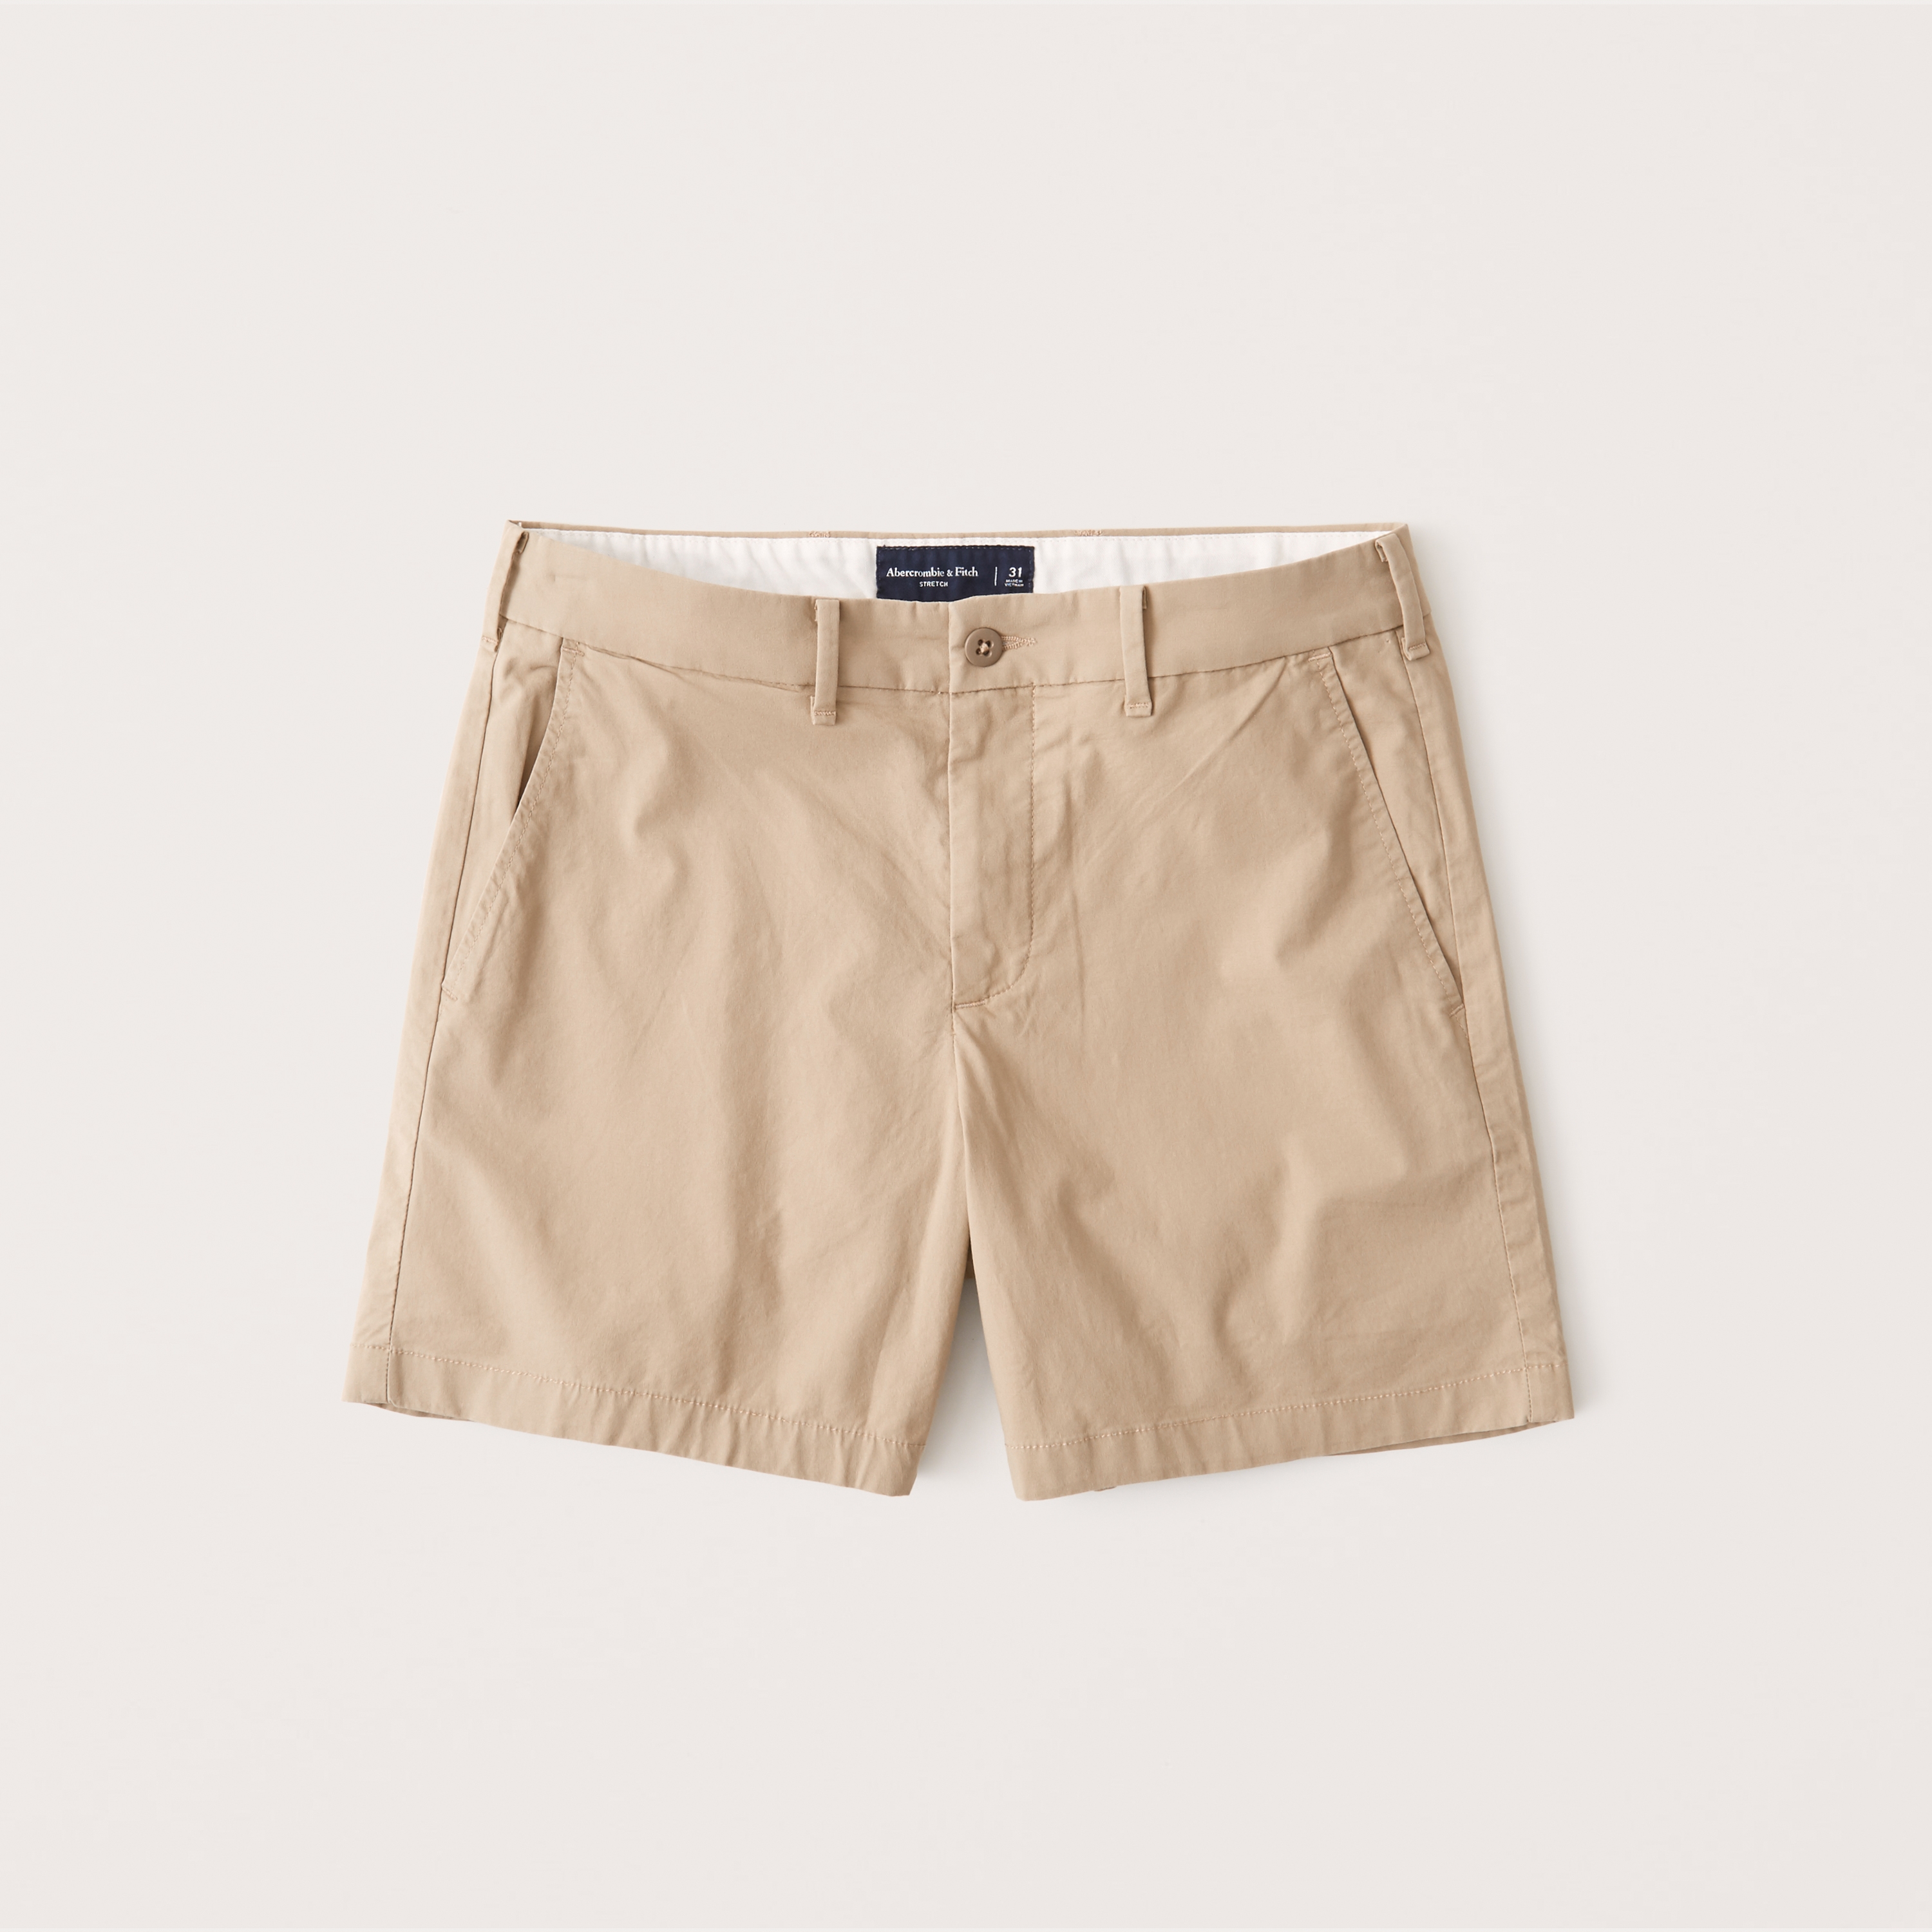 abercrombie 5 inch shorts